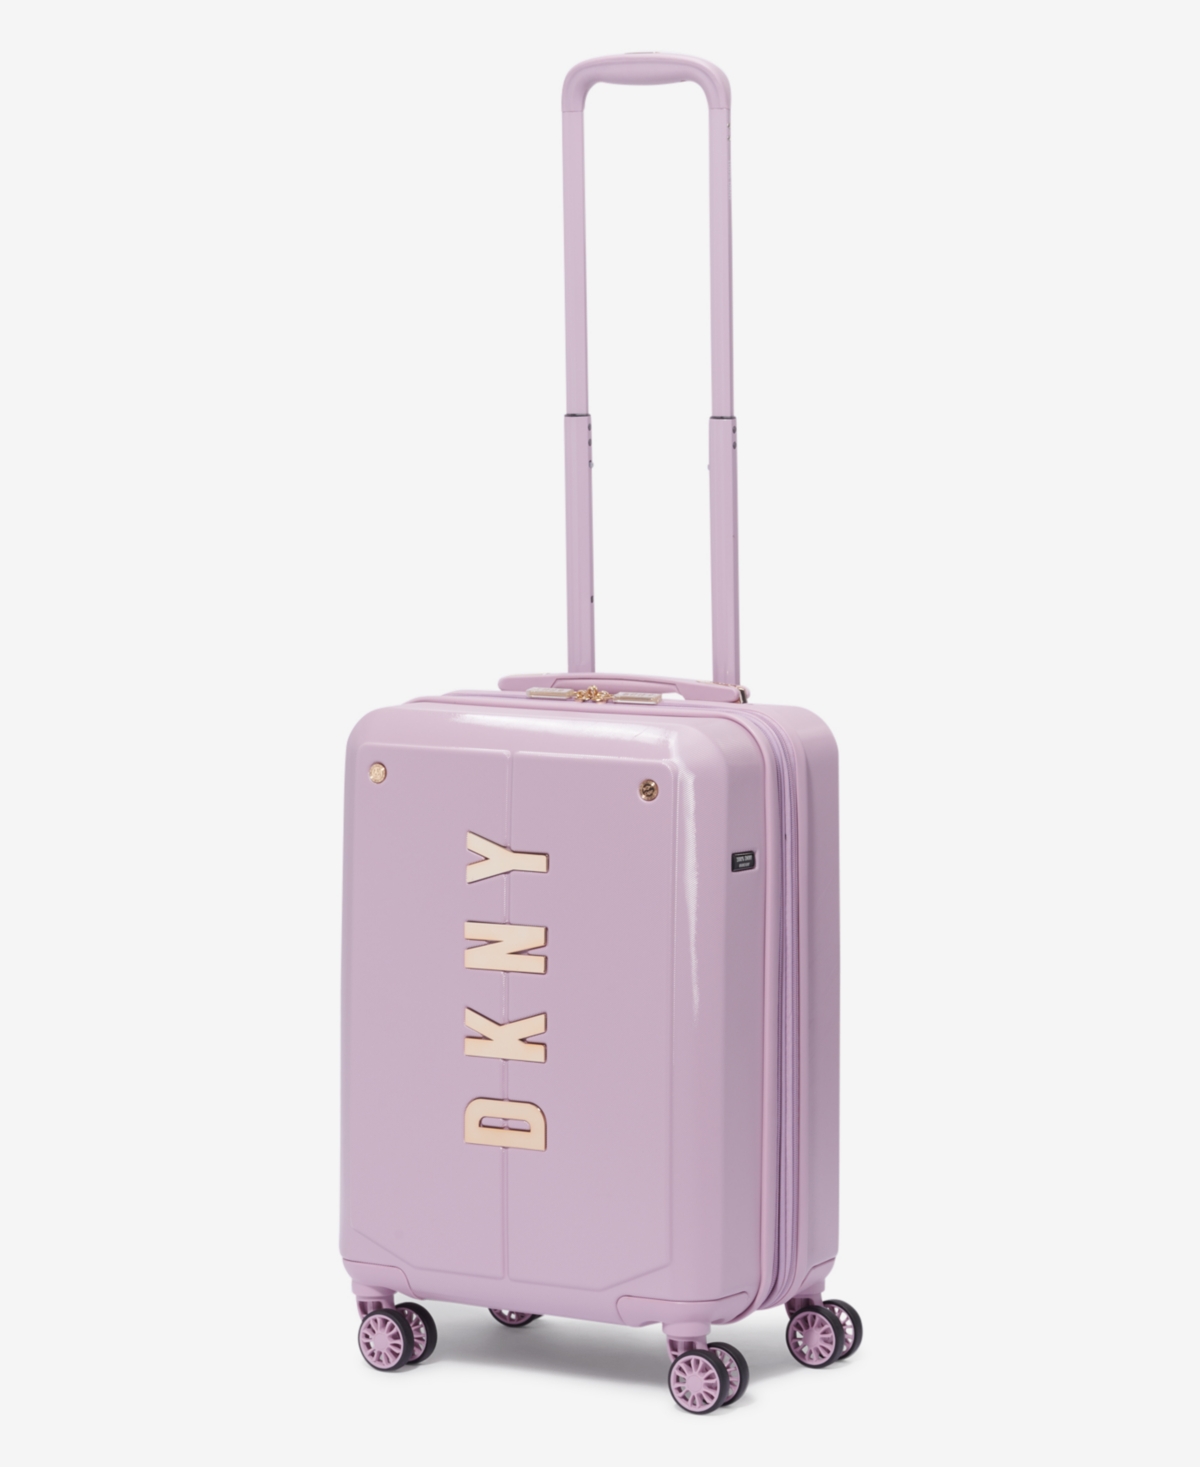 Nyc 20" Upright Carry-on - Lavender